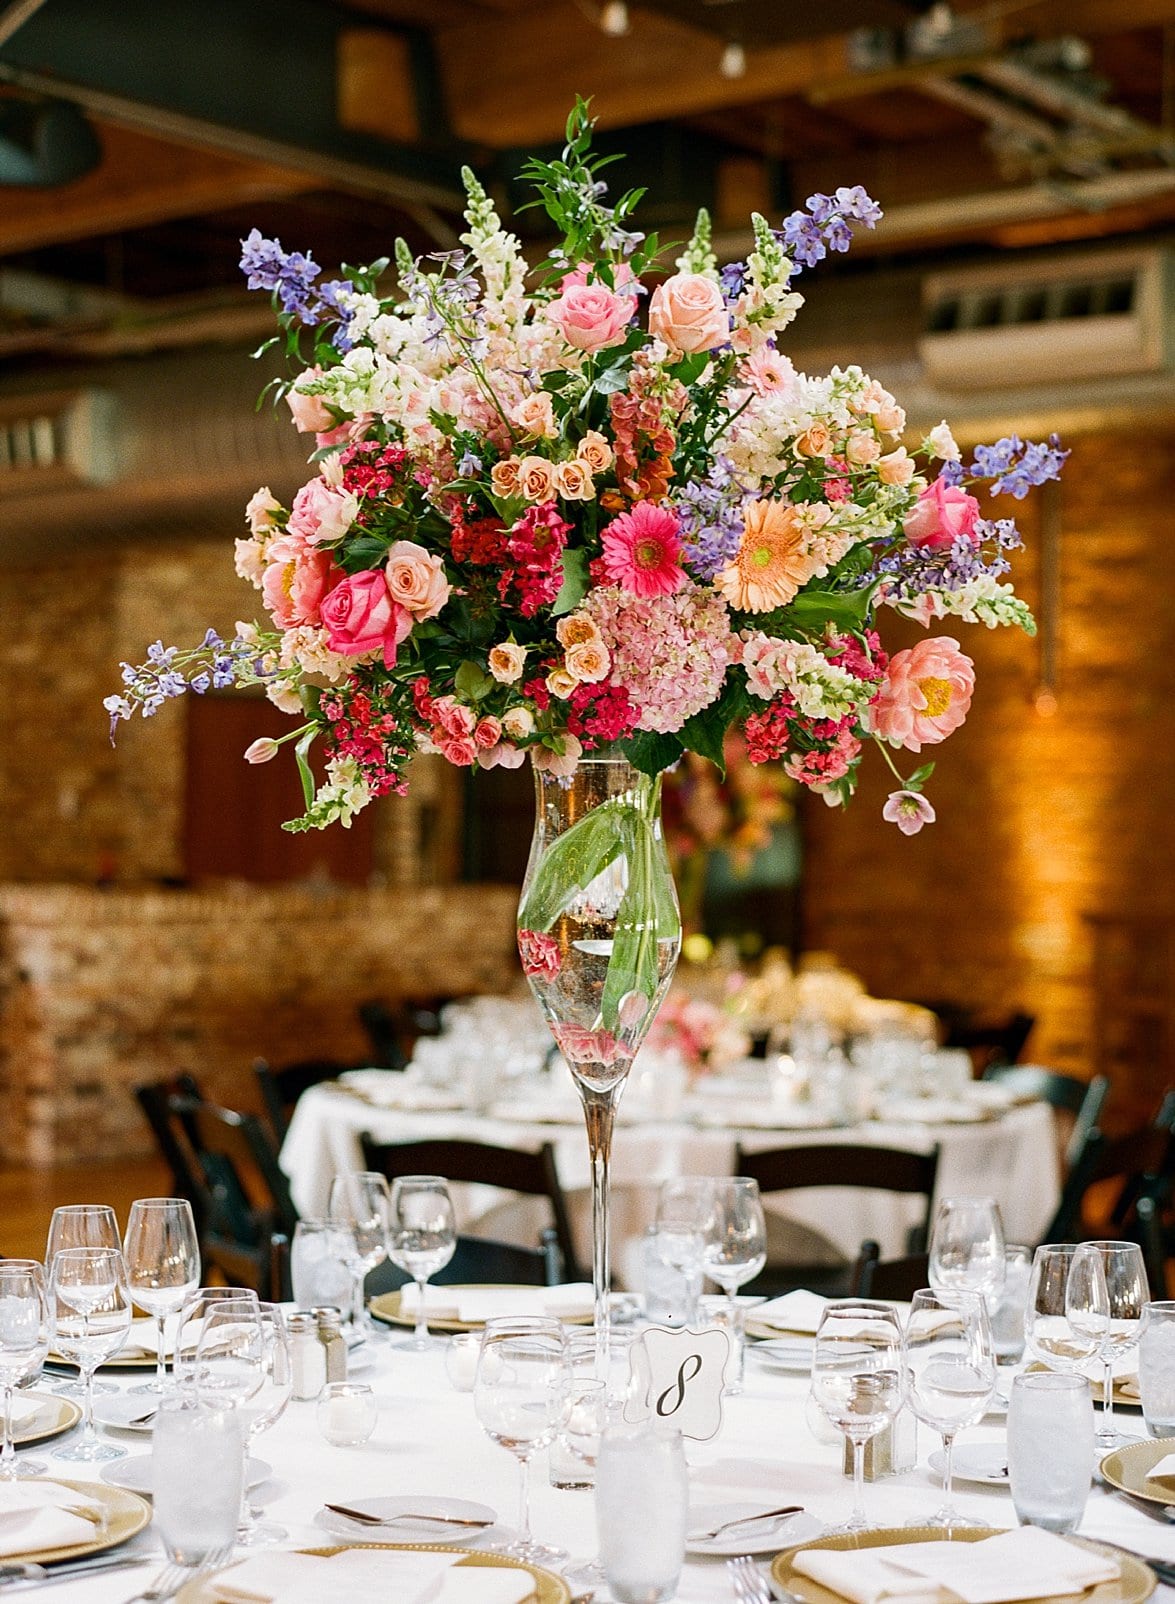 Artfully Arranged large round center piece with bright flowers in a tall clear glass vase photo